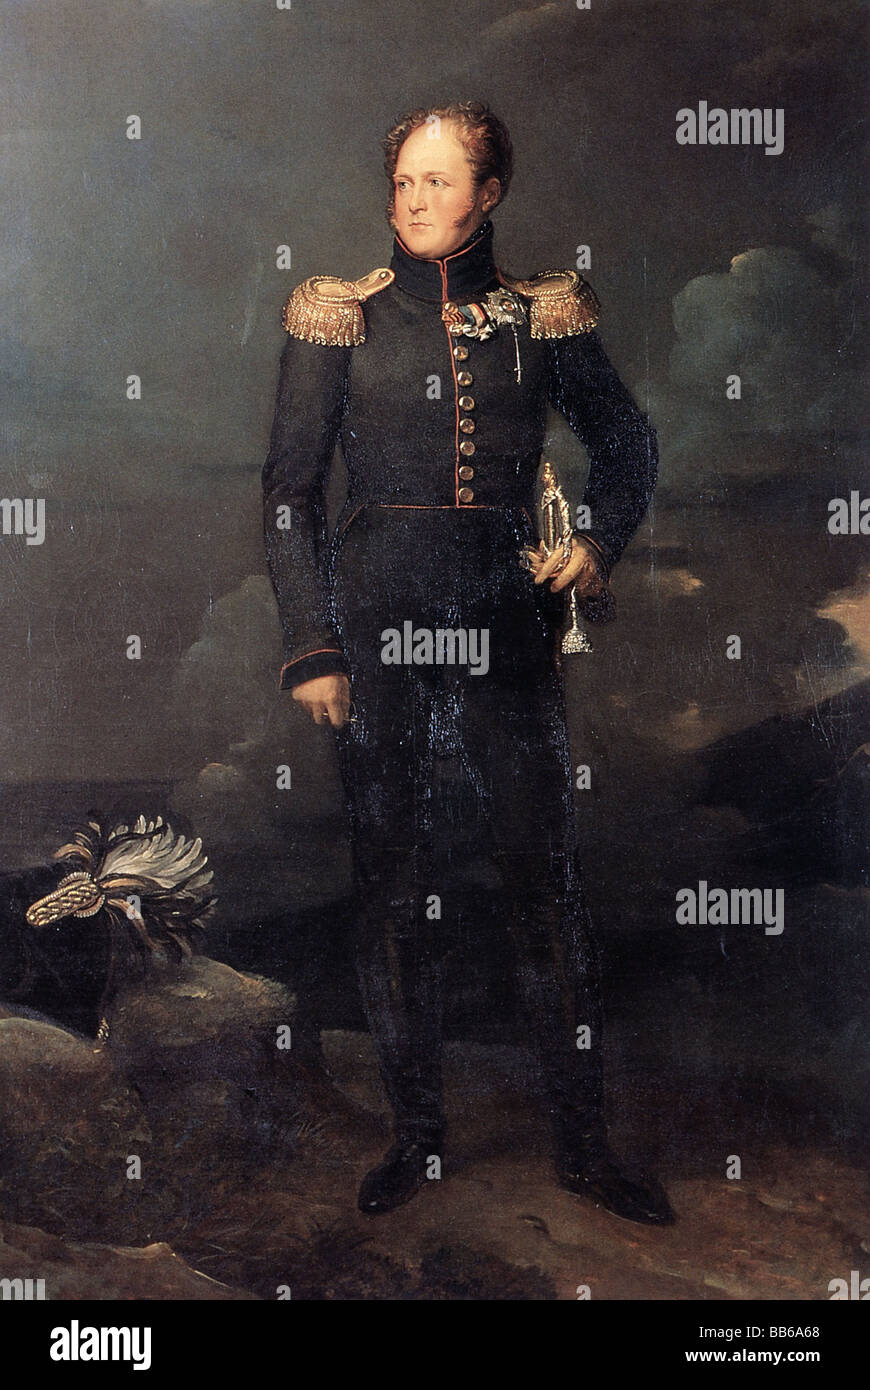 Alexander I of Russia, 23.12.1777 - 19.11.1825, Emperor of Russia since 1801, full length, painting by Francois Gerard, circa 1815, Stock Photo